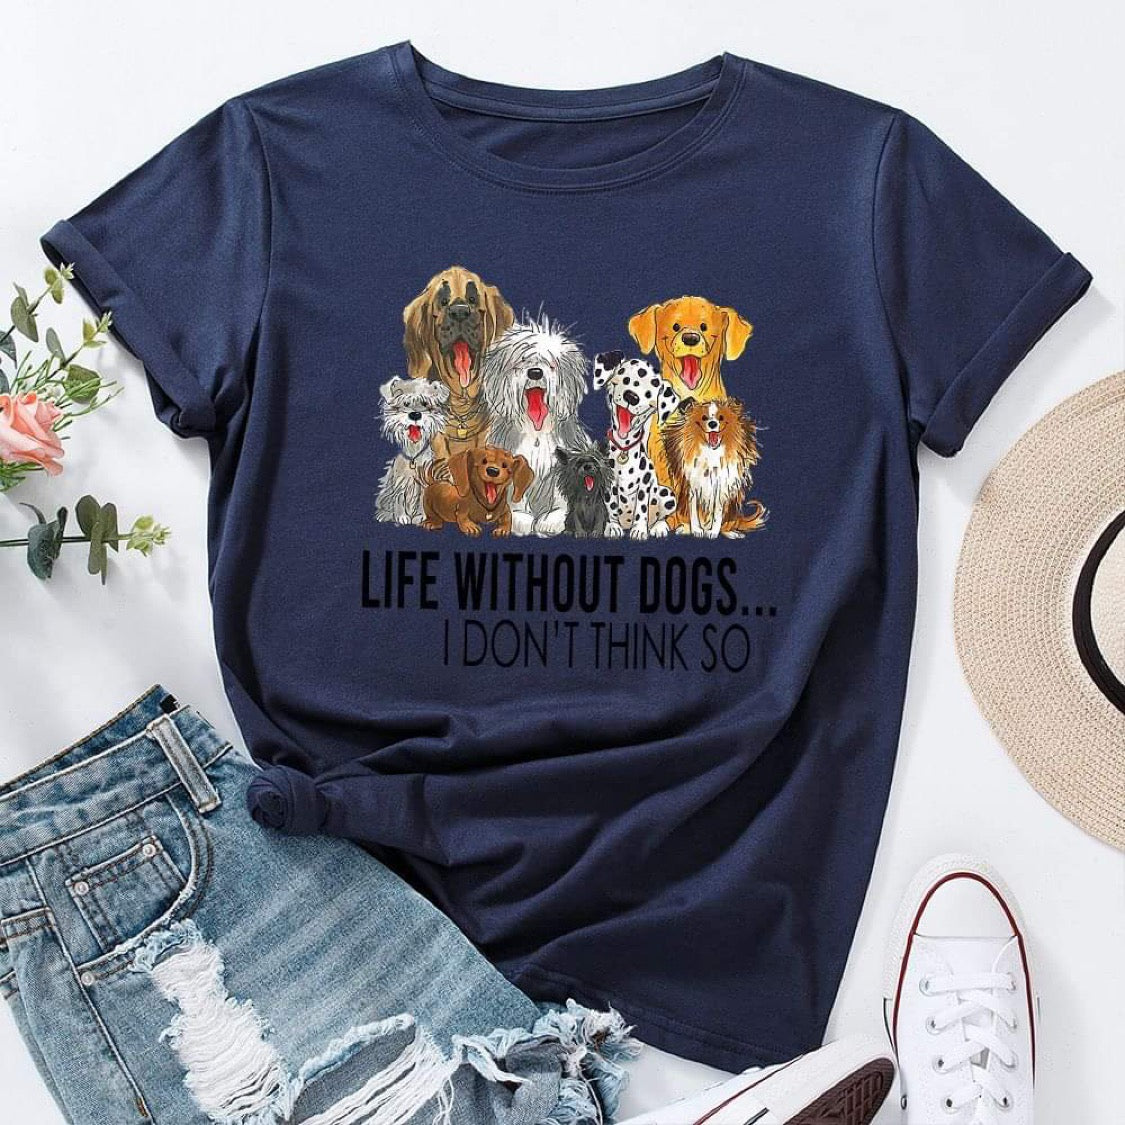 'Life Without Dogs... I Don't Think So' Tee Shirt (Assorted Colours)